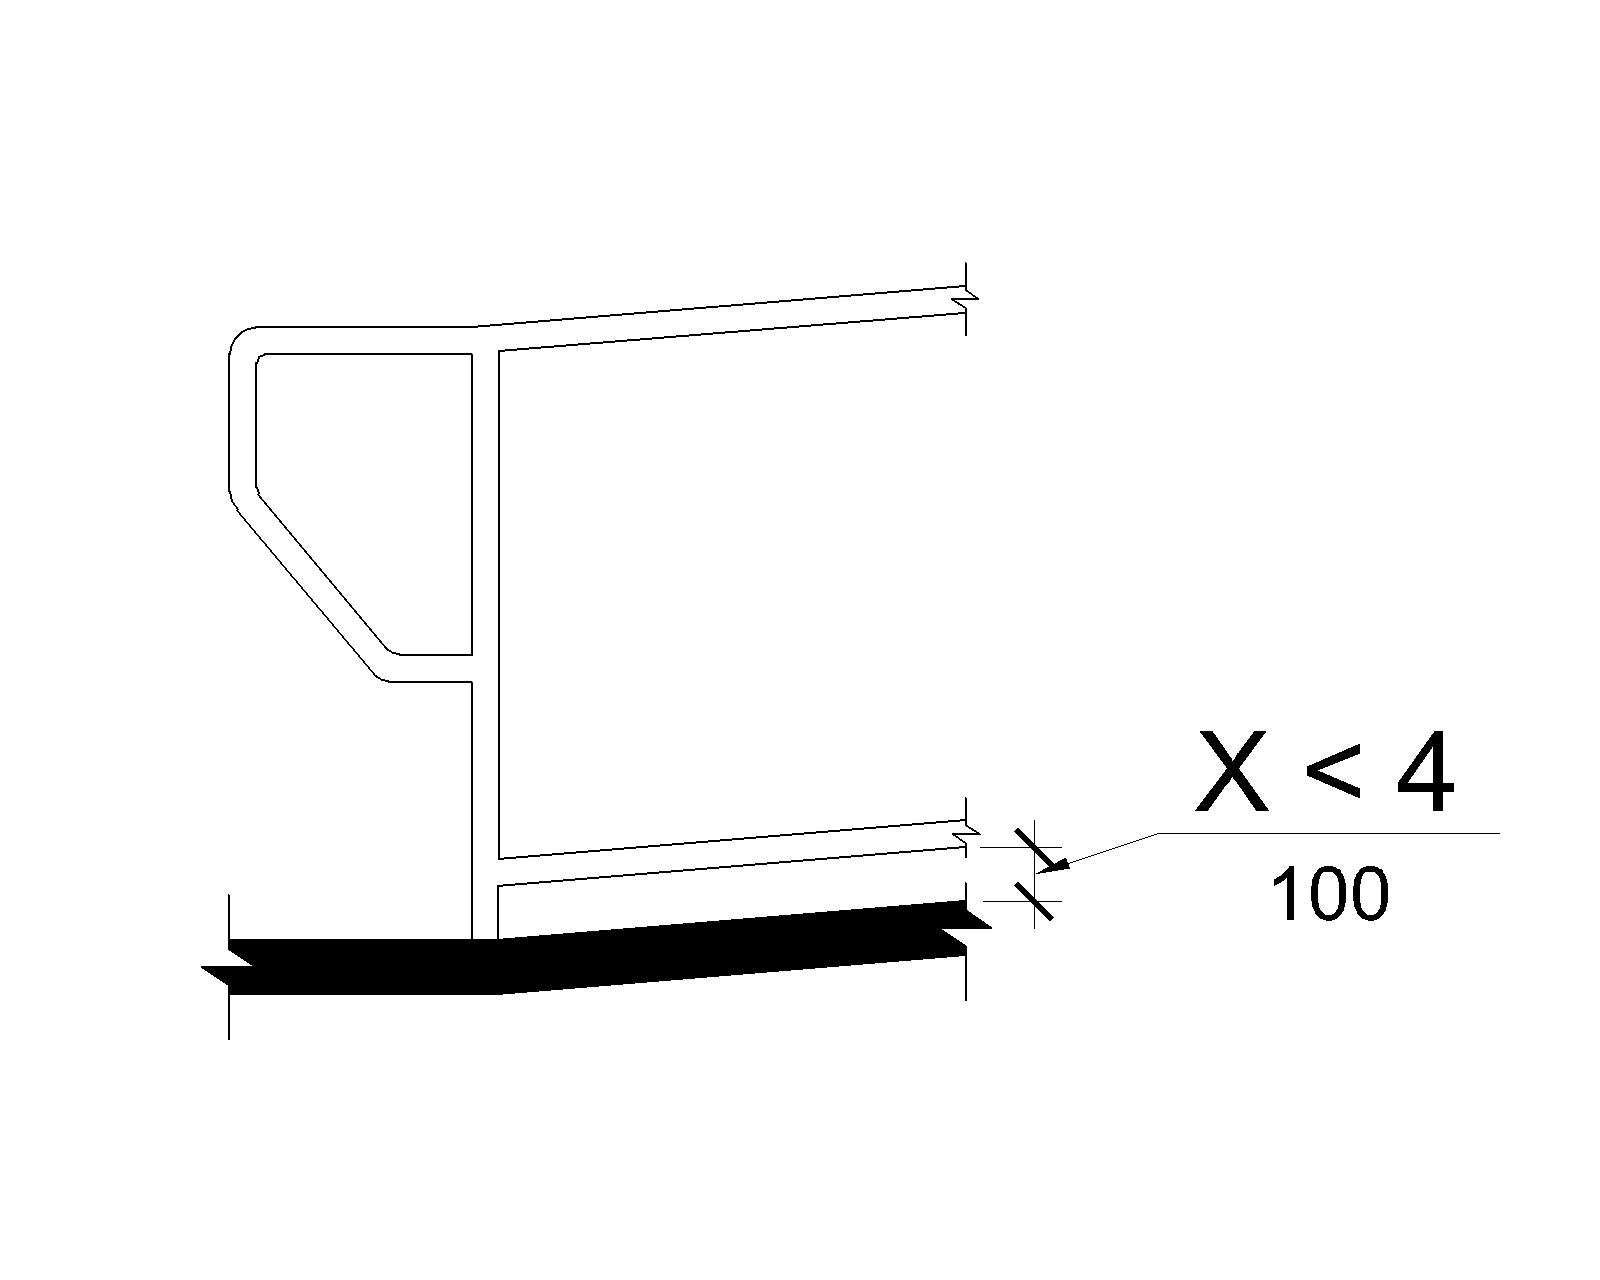 An elevation drawing showing a vertical clearance of less than 4 inches (100 mm) between the ramp surface and the bottom edge of a horizontal rail.